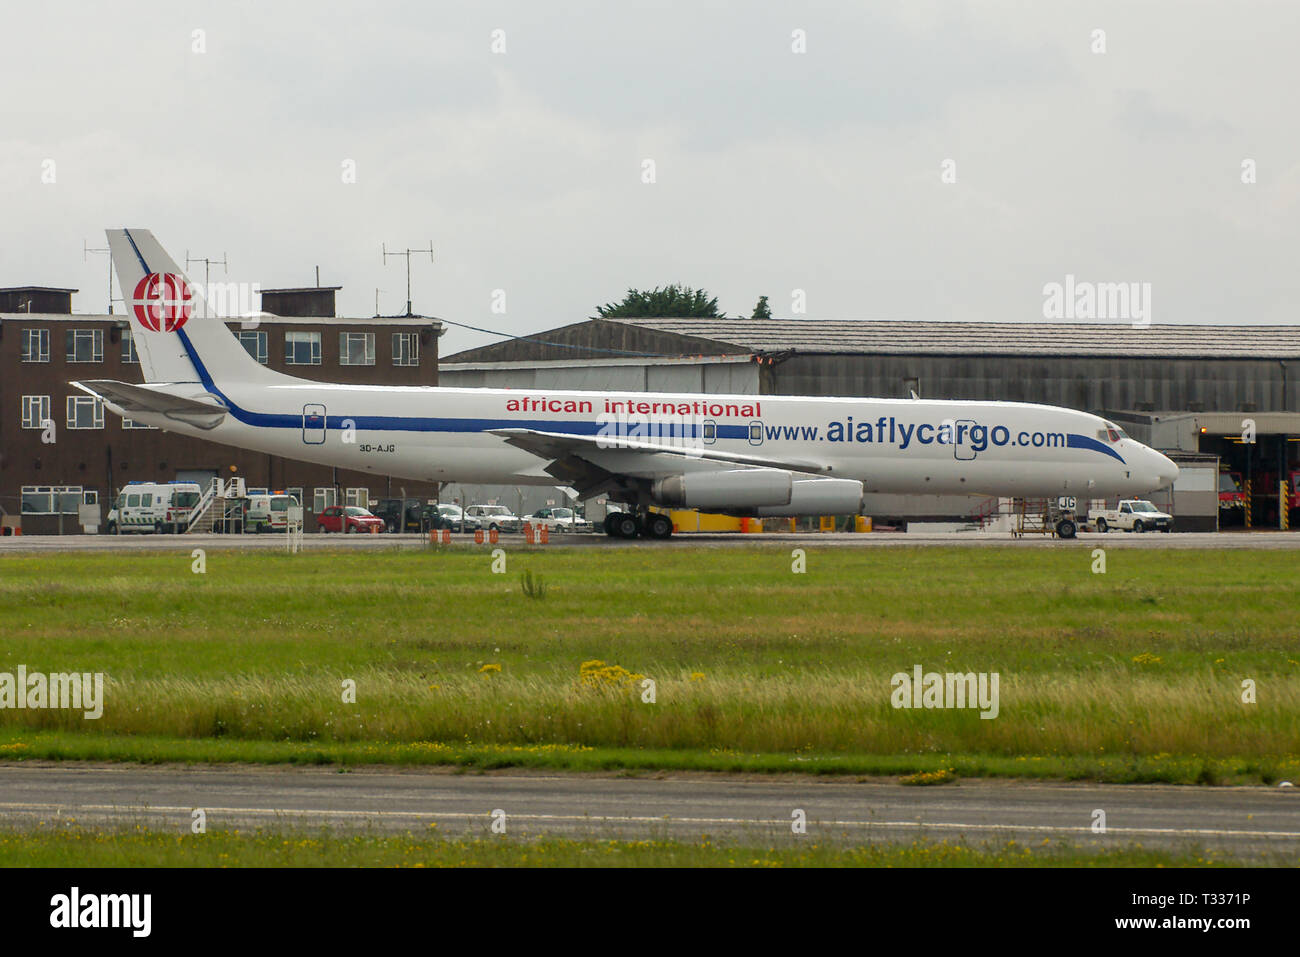 African International Airways Douglas DC-8 jet airliner plane 3D-AJG at London Southend Airport, Essex, UK. Cargo airline. Classic Stock Photo